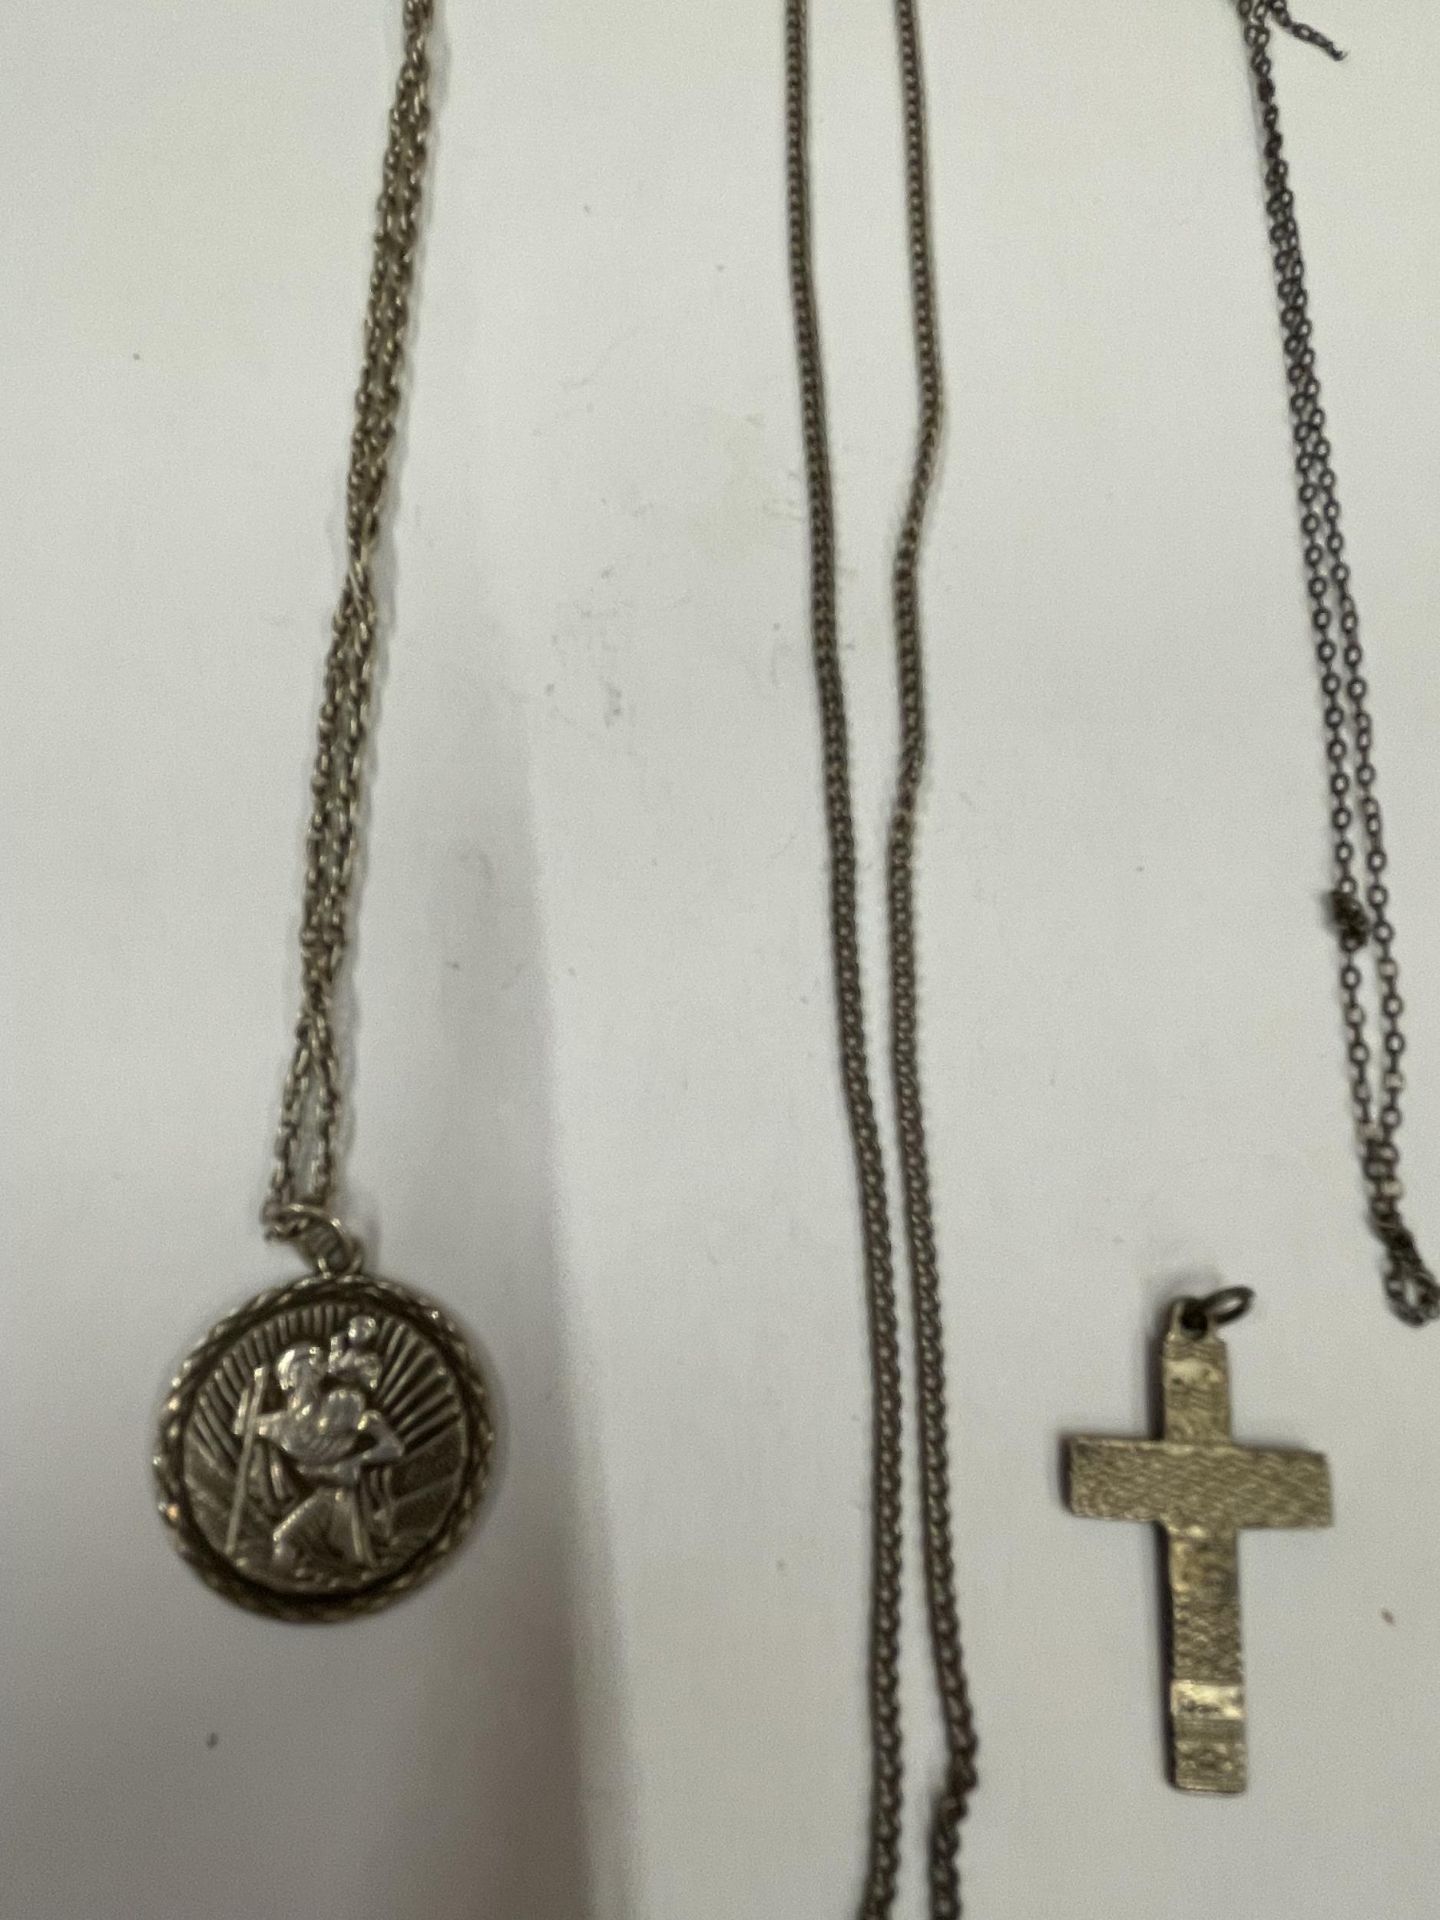 FOUR SILVER NECKLACES WITH A ST CHRISTOPHER AND A CROSS - Image 2 of 3